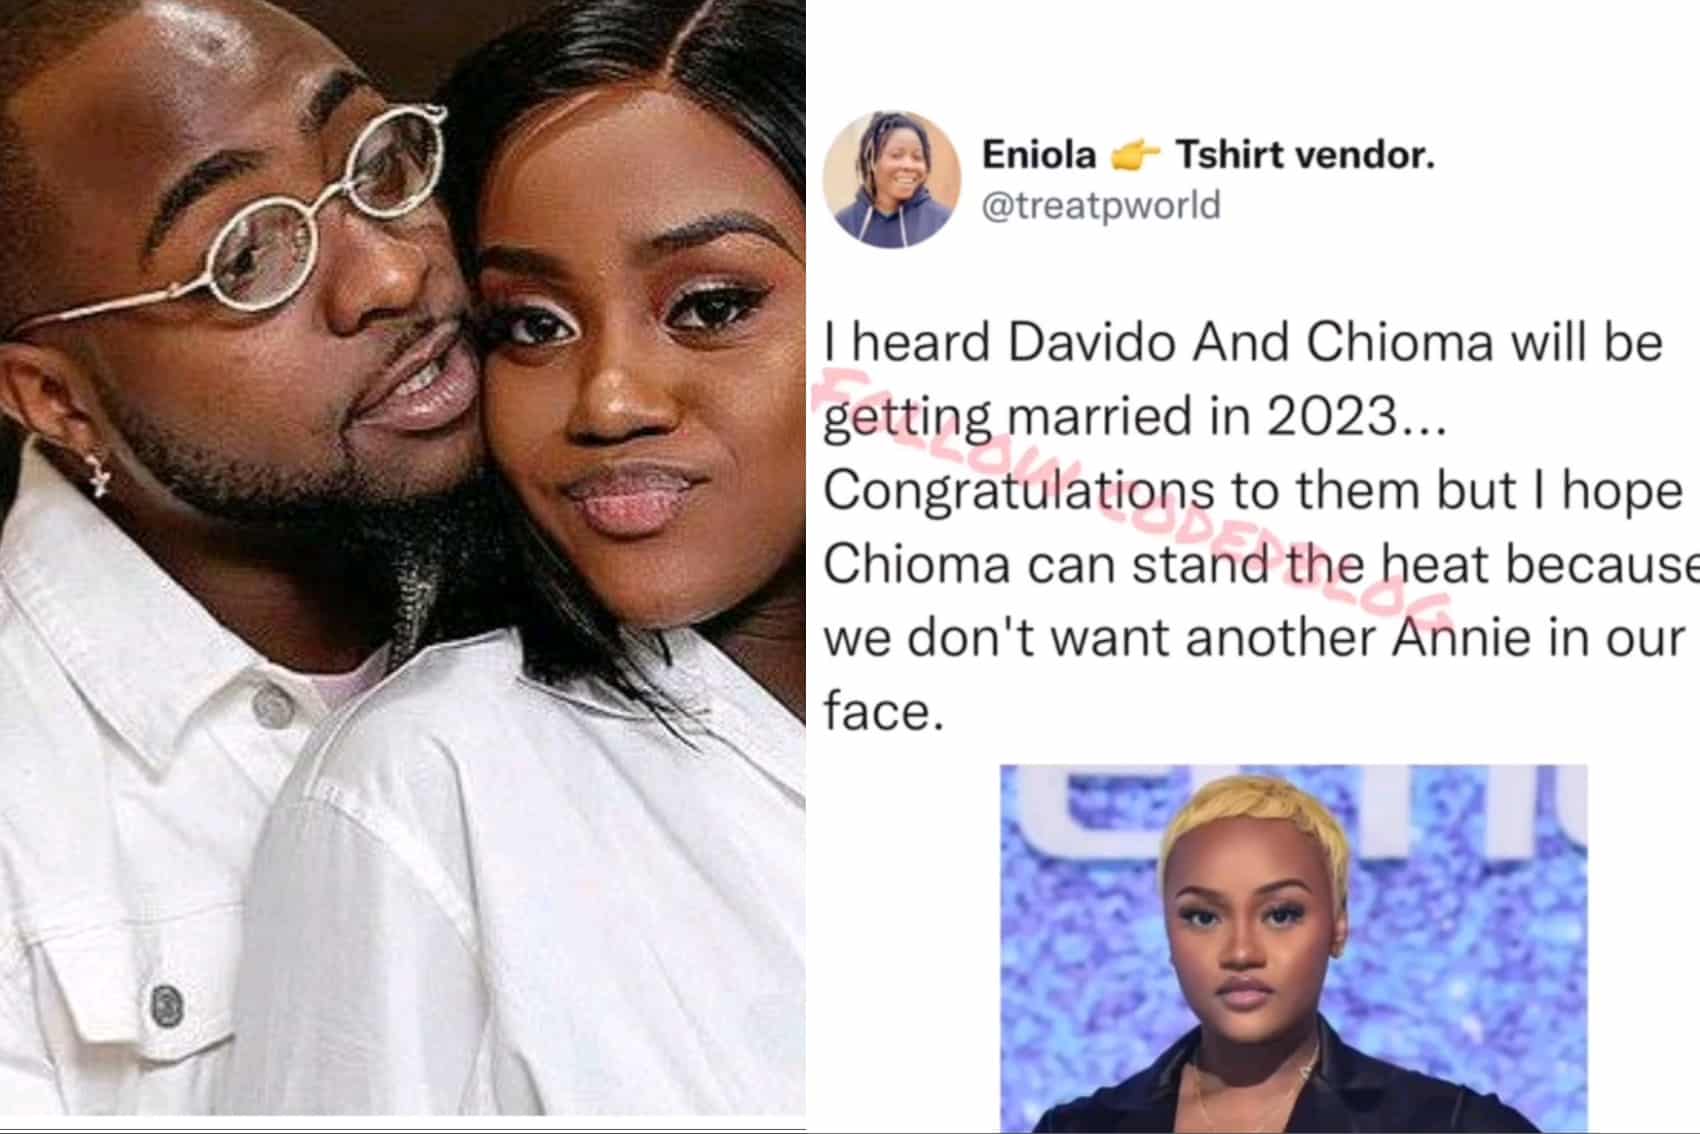 We don’t want another Annie in our face – Lady advises Chioma on her relationship with Davido